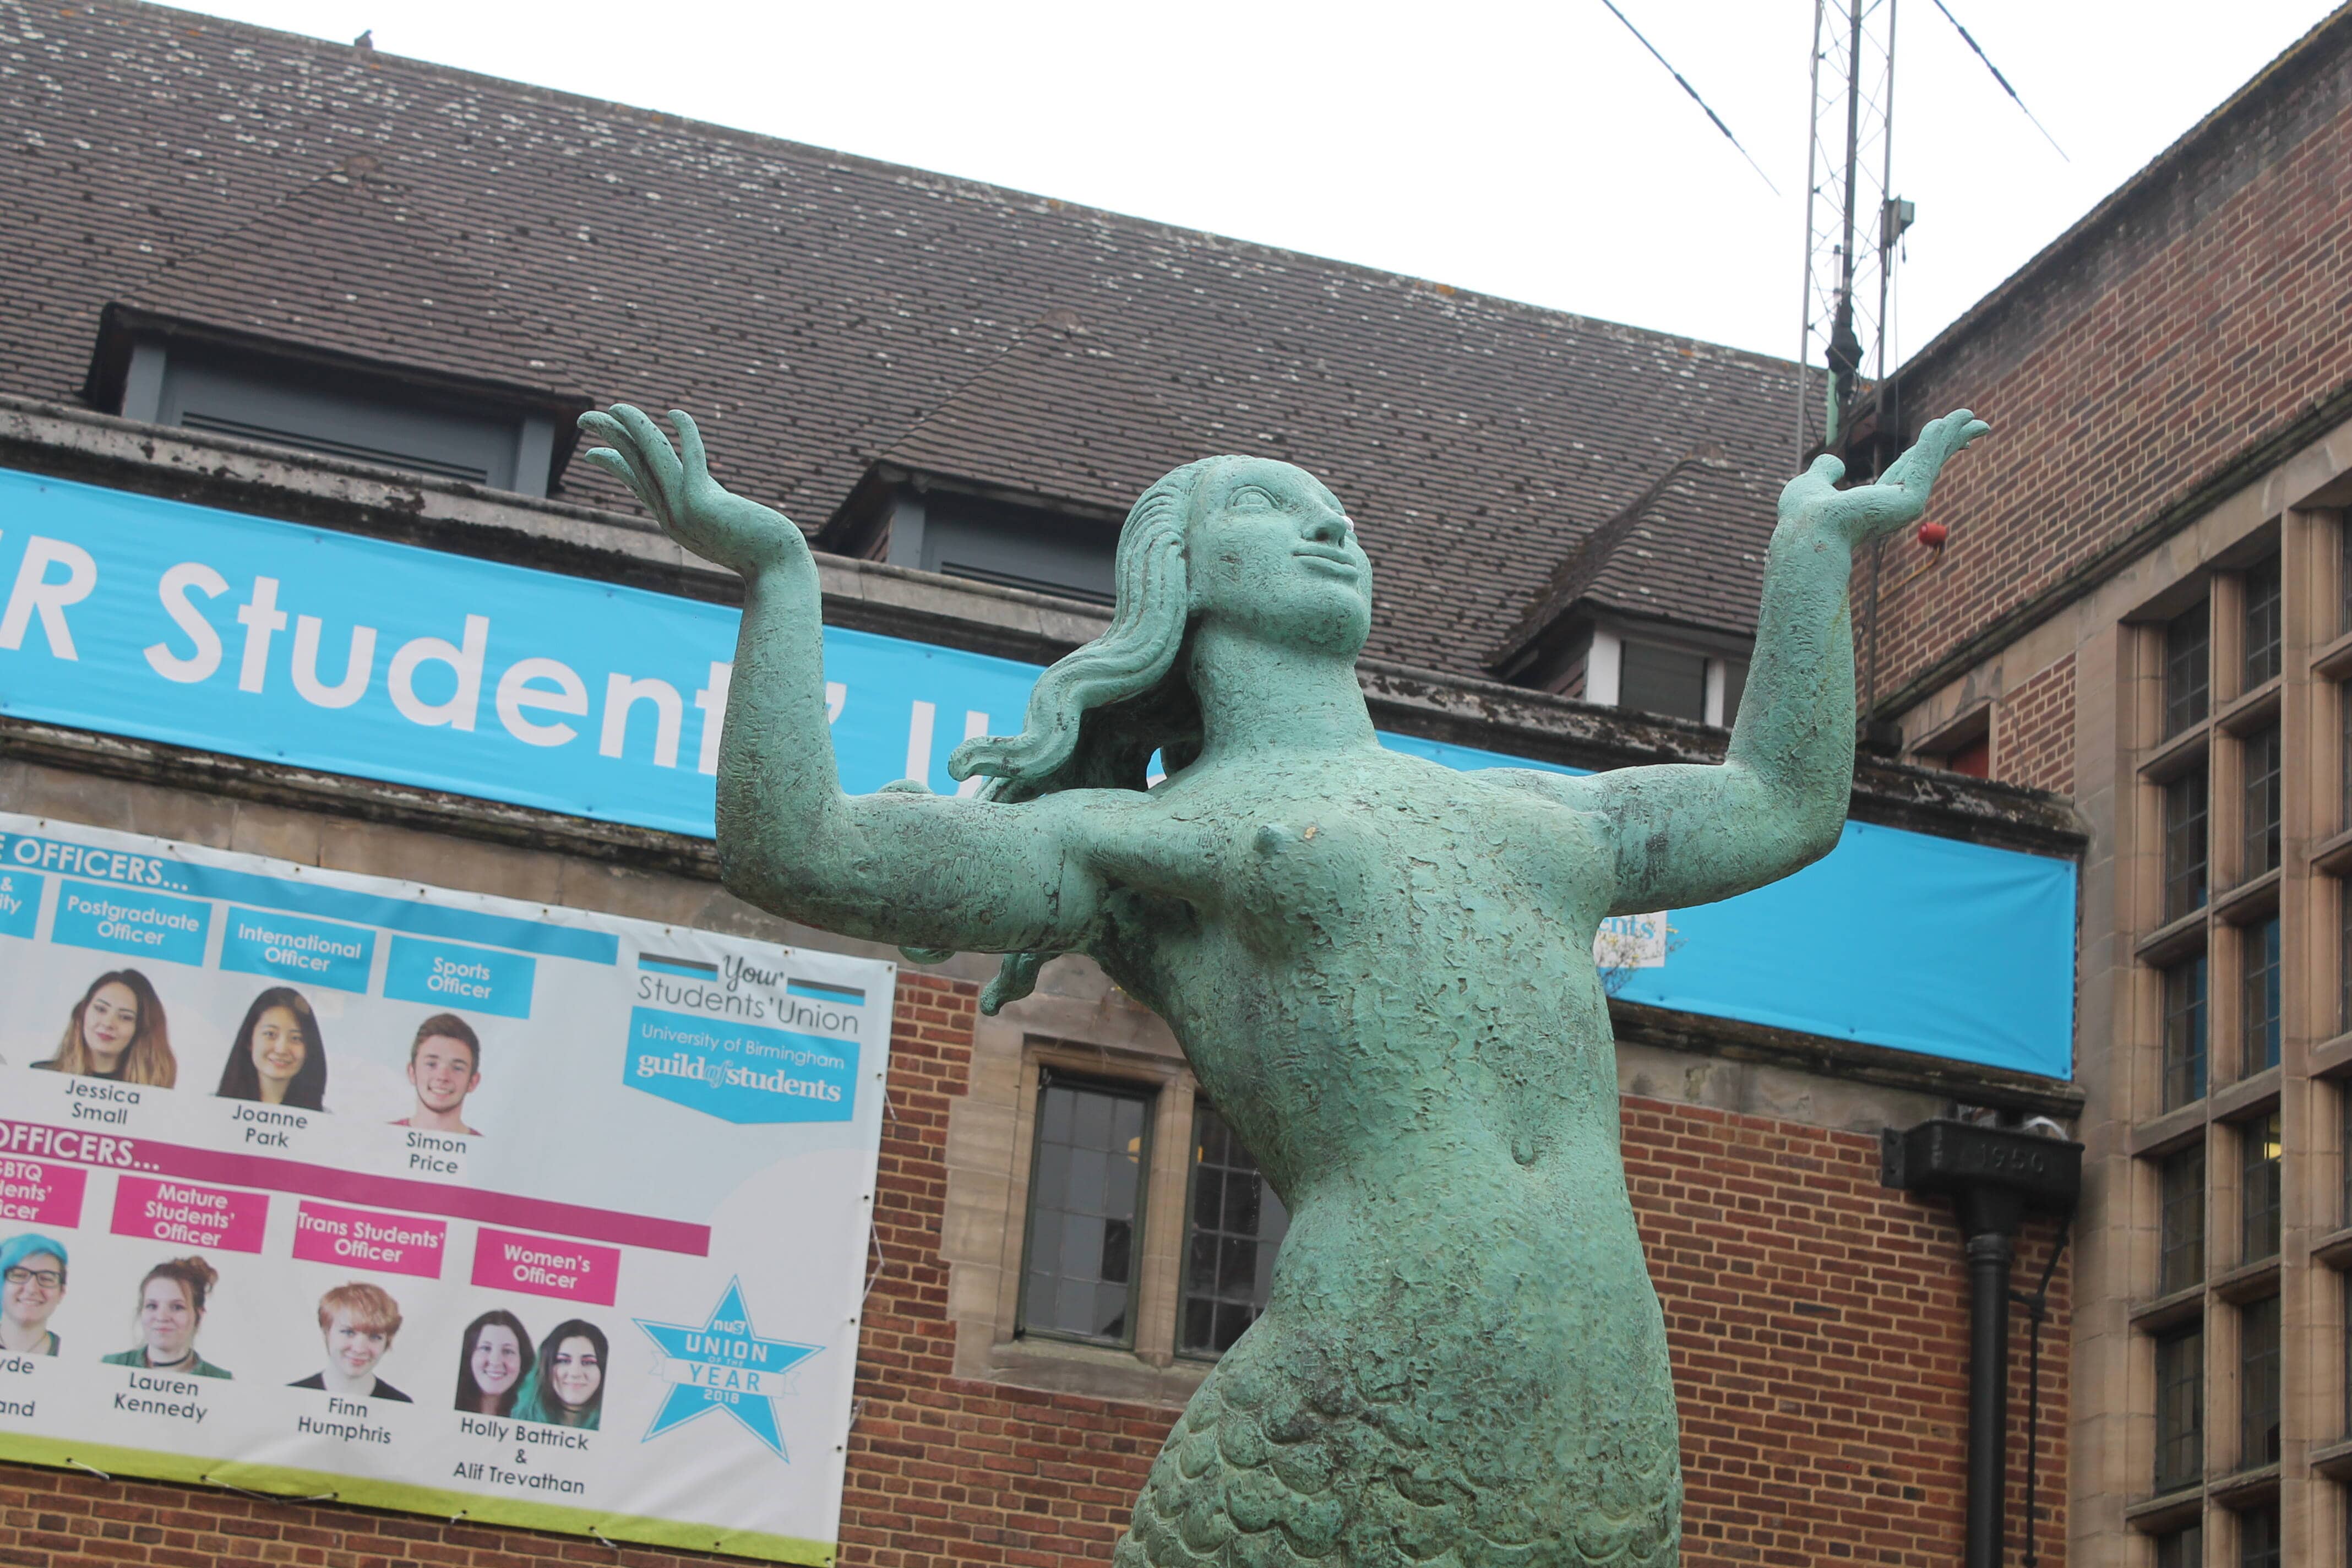 The mermaid statue outside the Guild of Students, the venue of the Edgbaston general election hustings